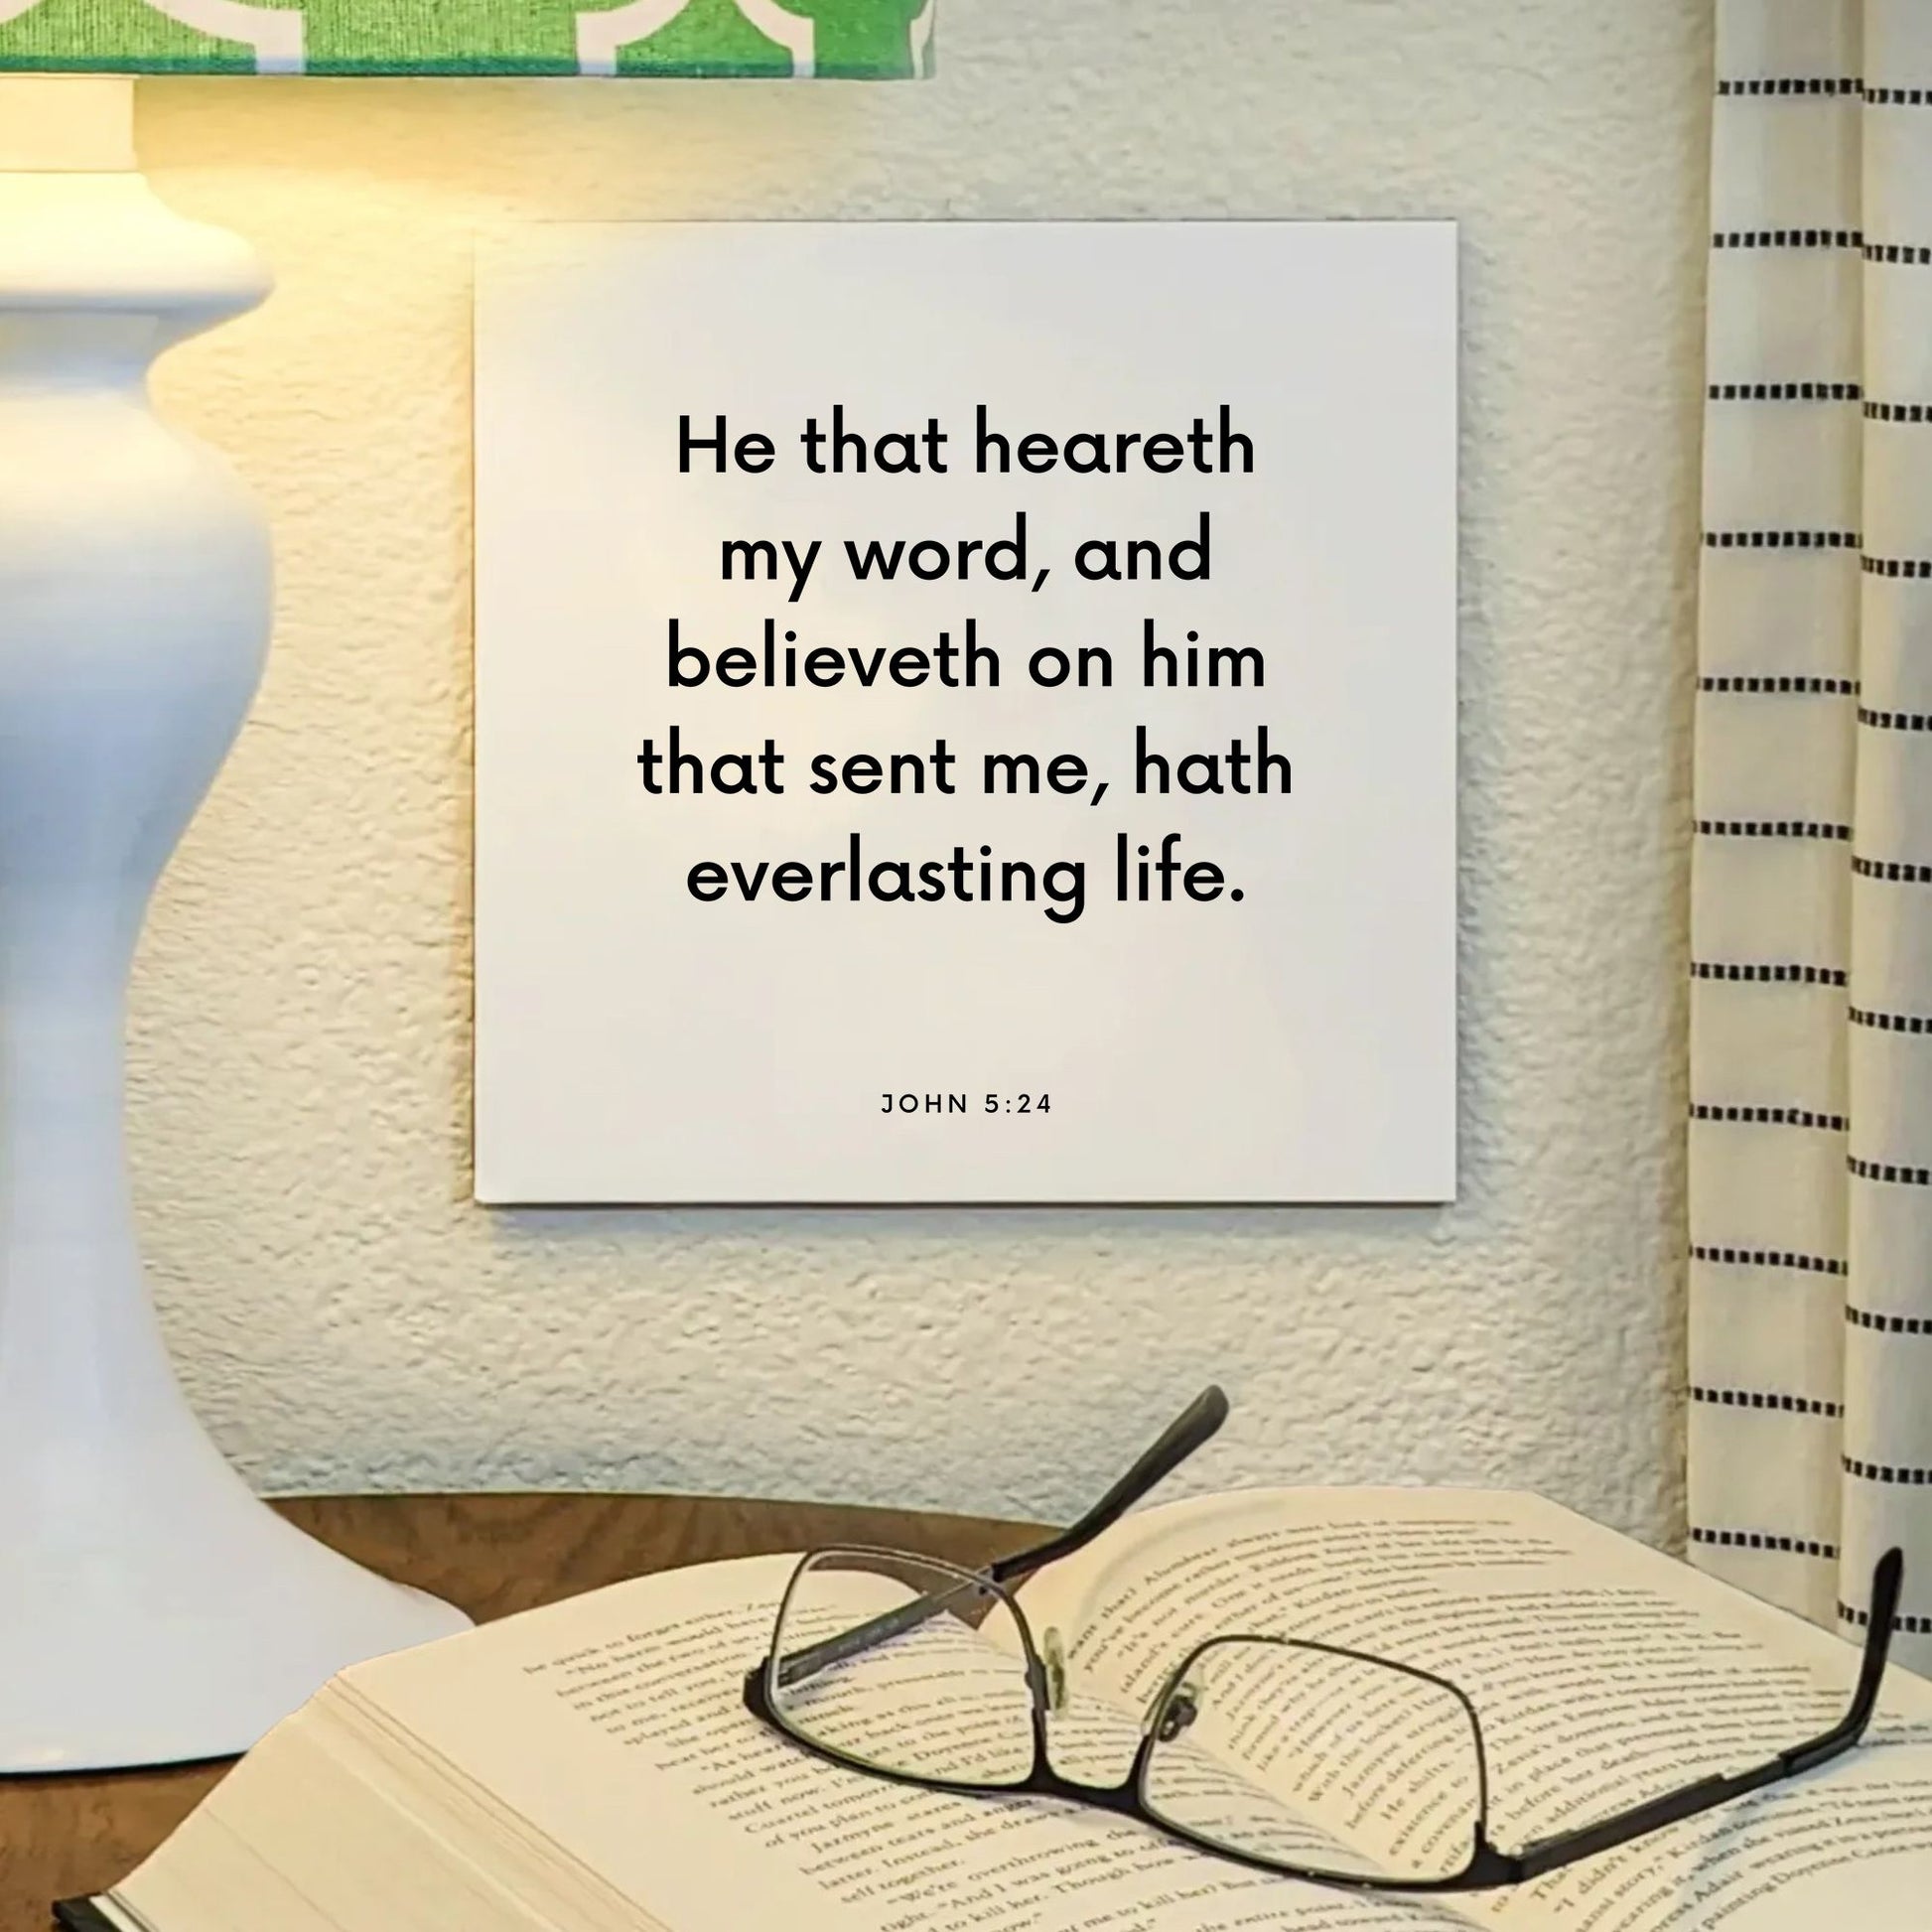 Lamp mouting of the scripture tile for John 5:24 - "He that heareth my word hath everlasting life"